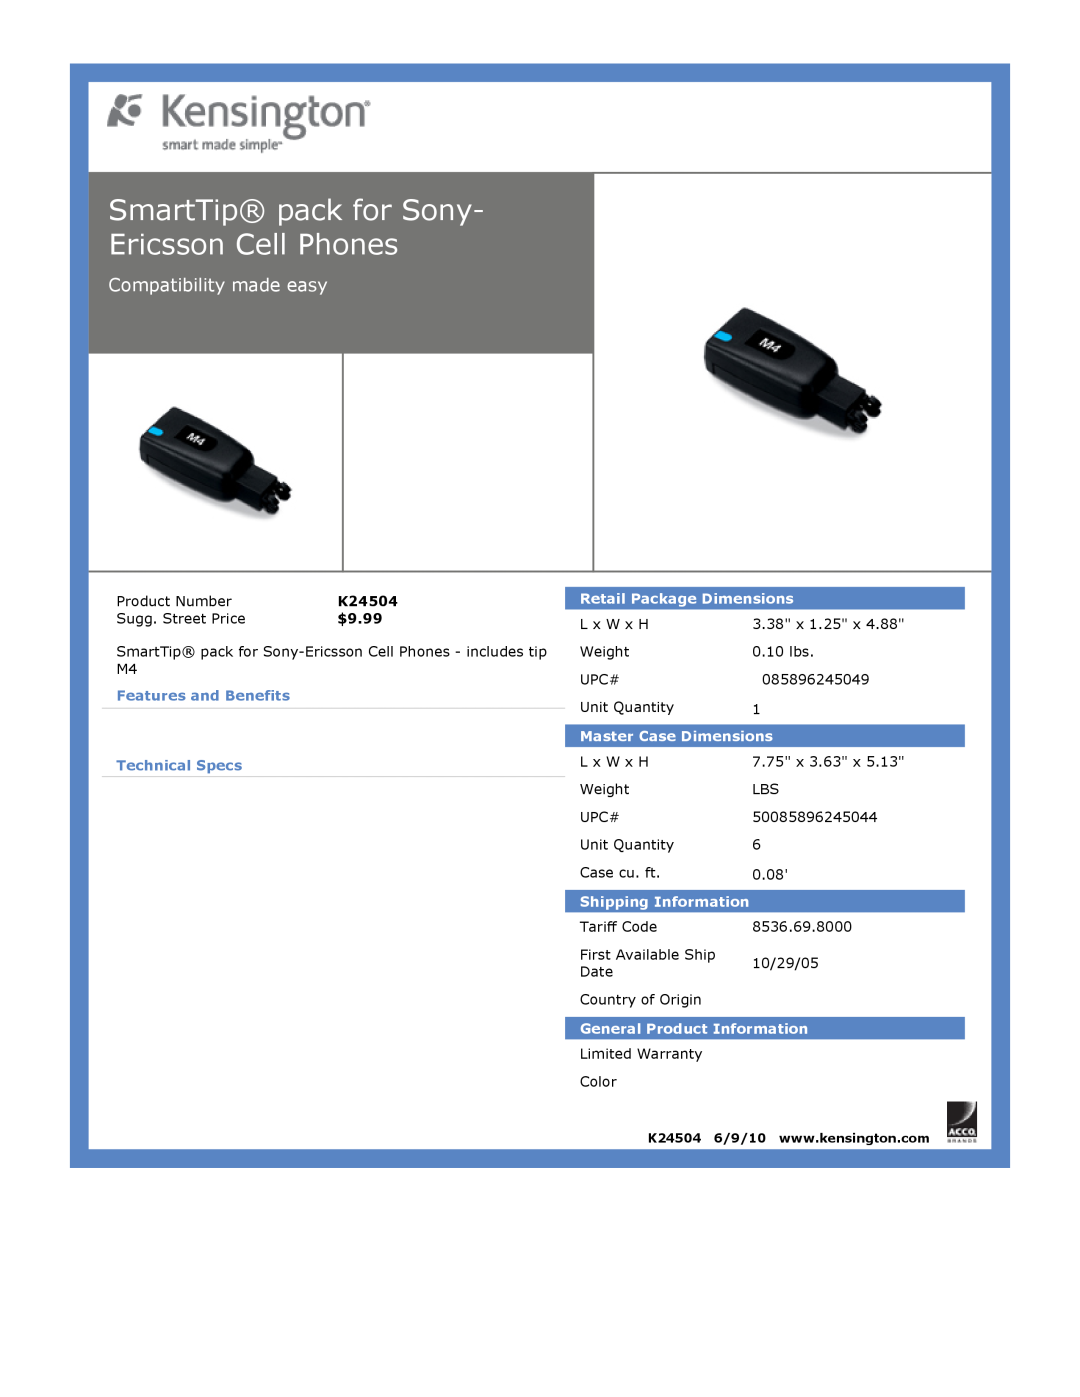 Kensington EU64325 SmartTip pack for Sony- Ericsson Cell Phones, Compatibility made easy, $9.99, Retail Package Dimensions 